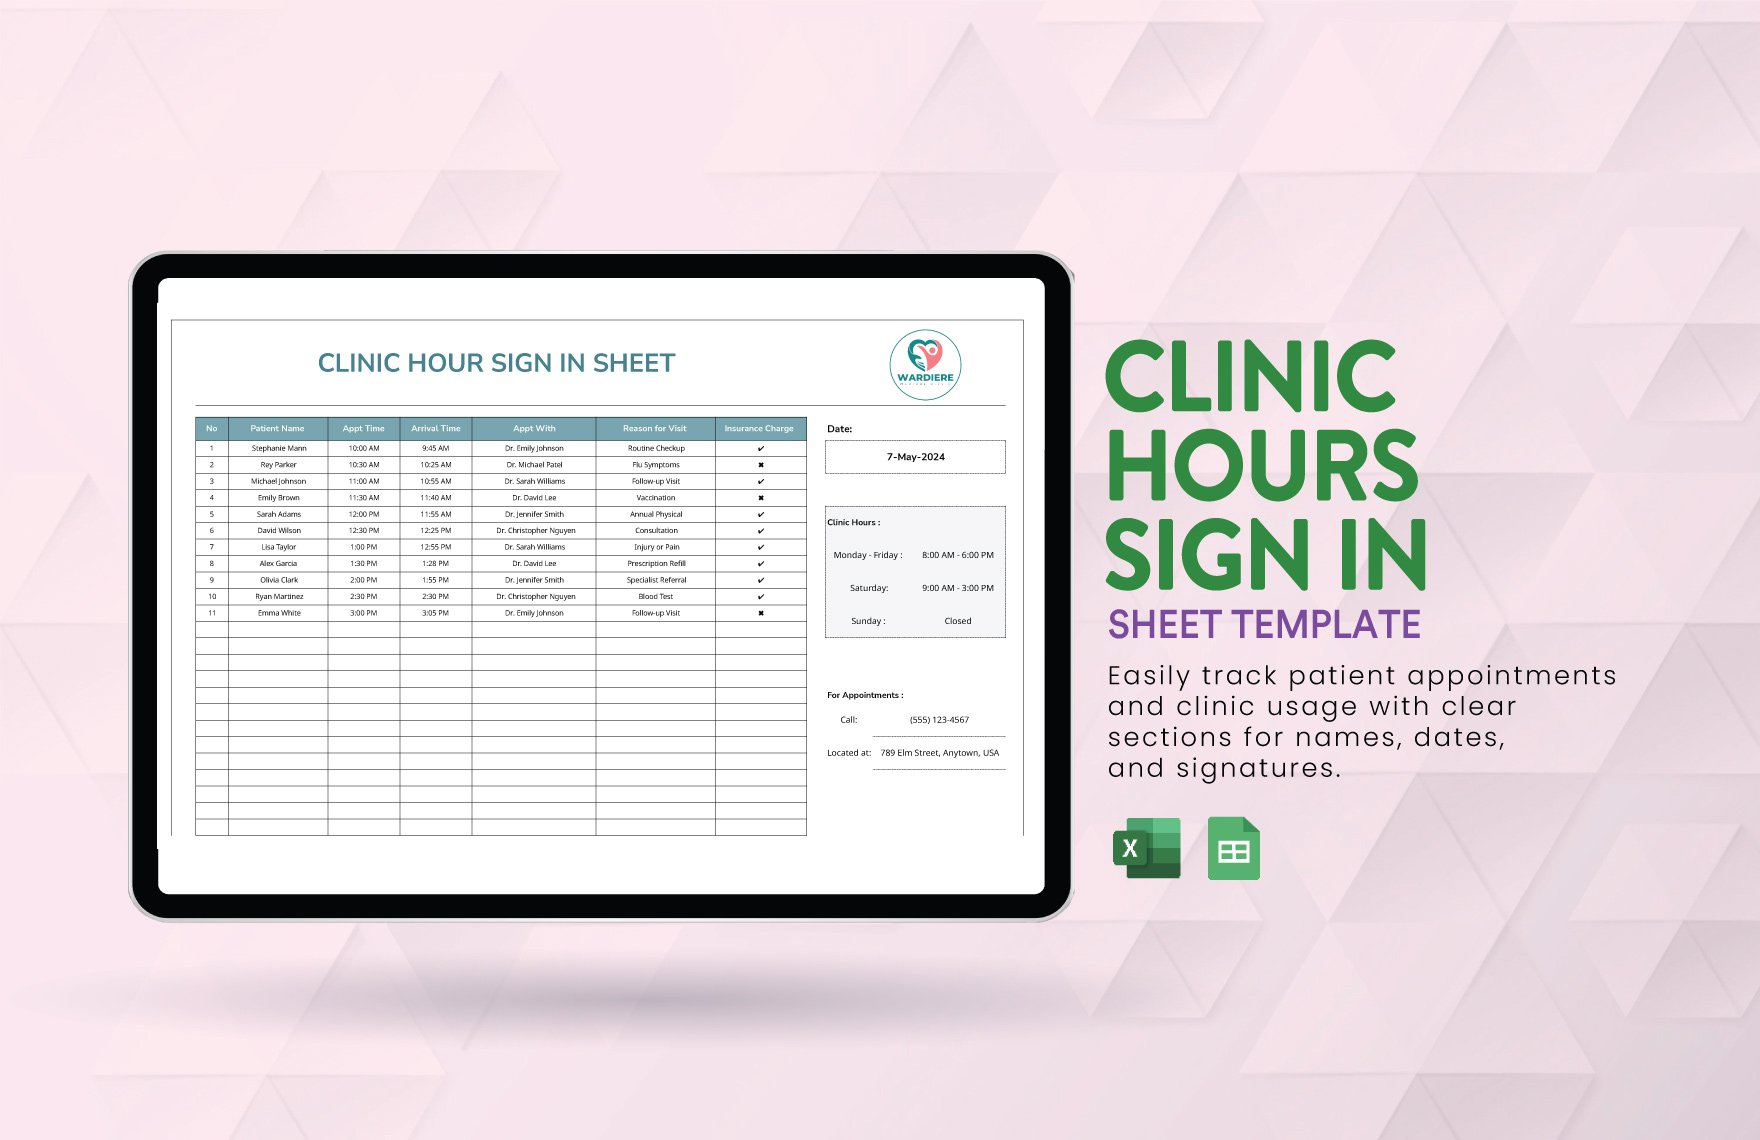 Clinic Hours Sign in Sheet Template in Excel, Google Sheets